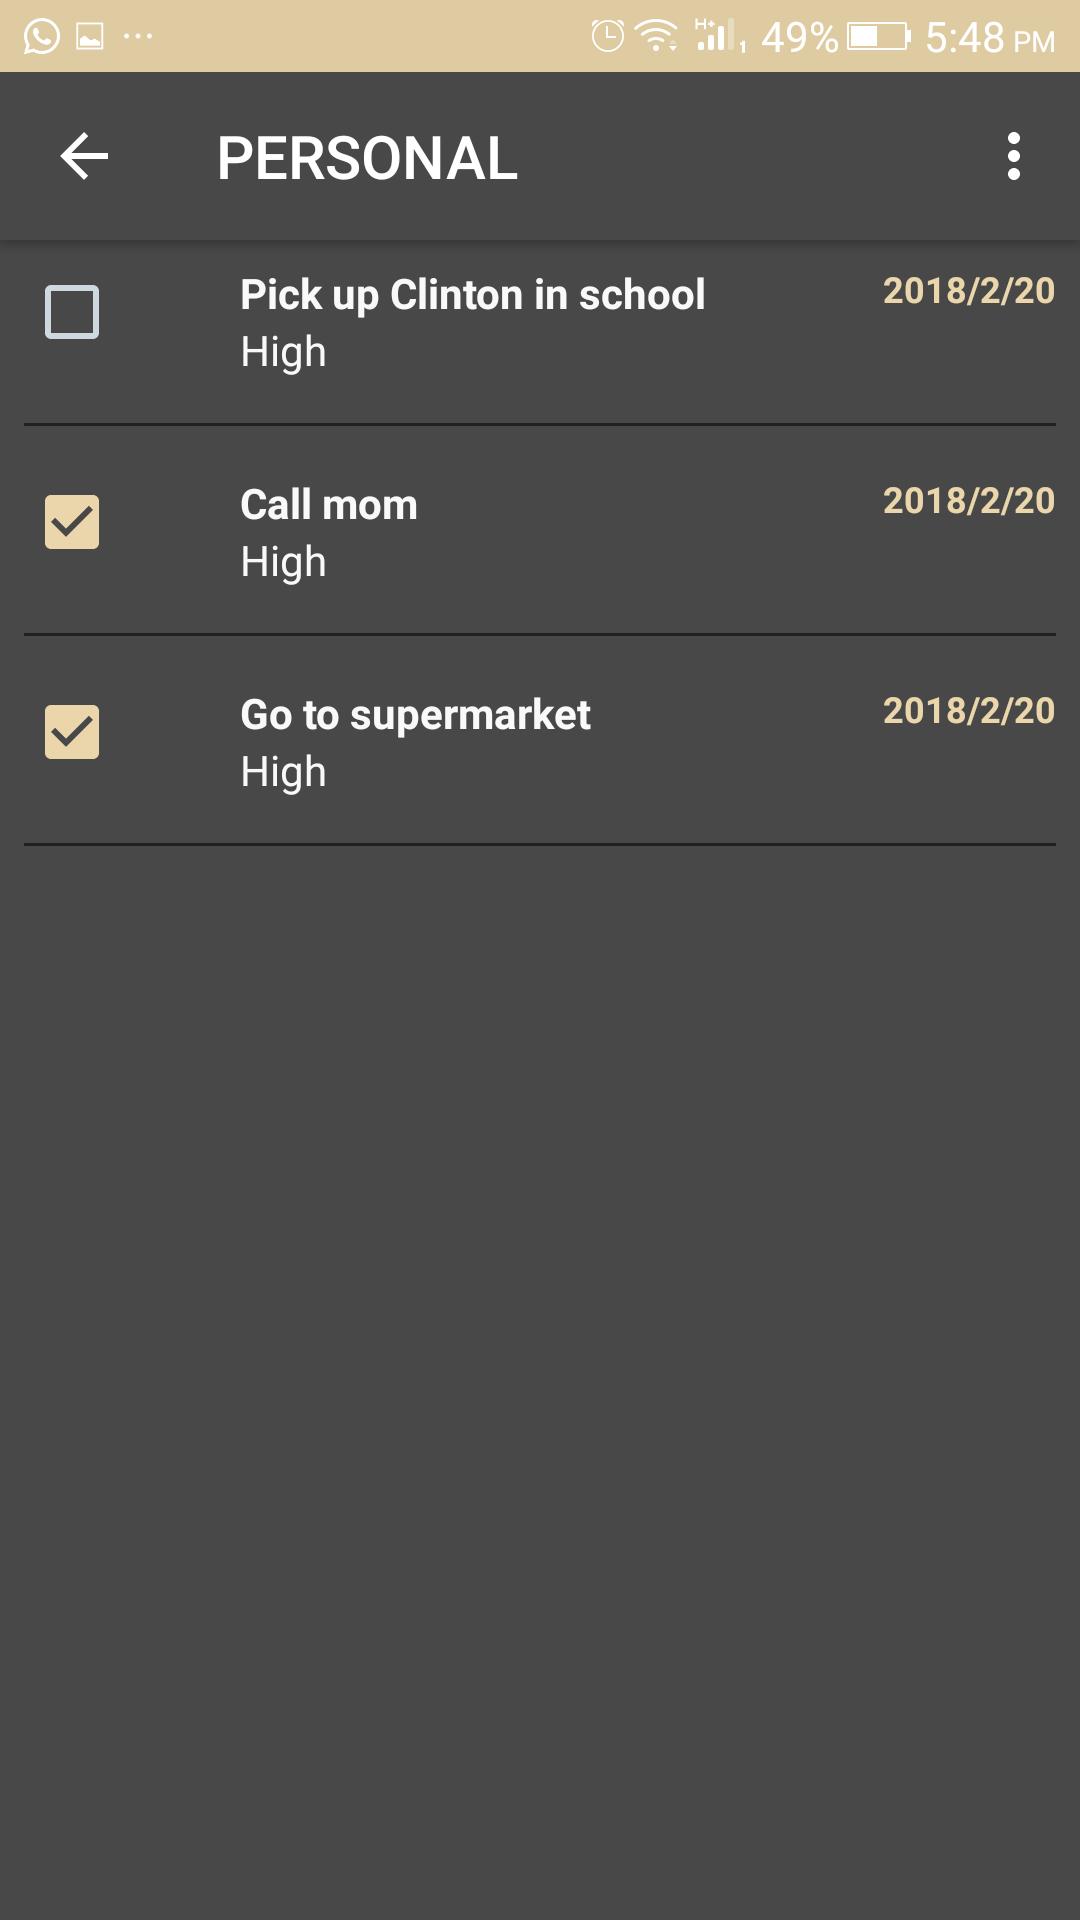 Daily planner download free